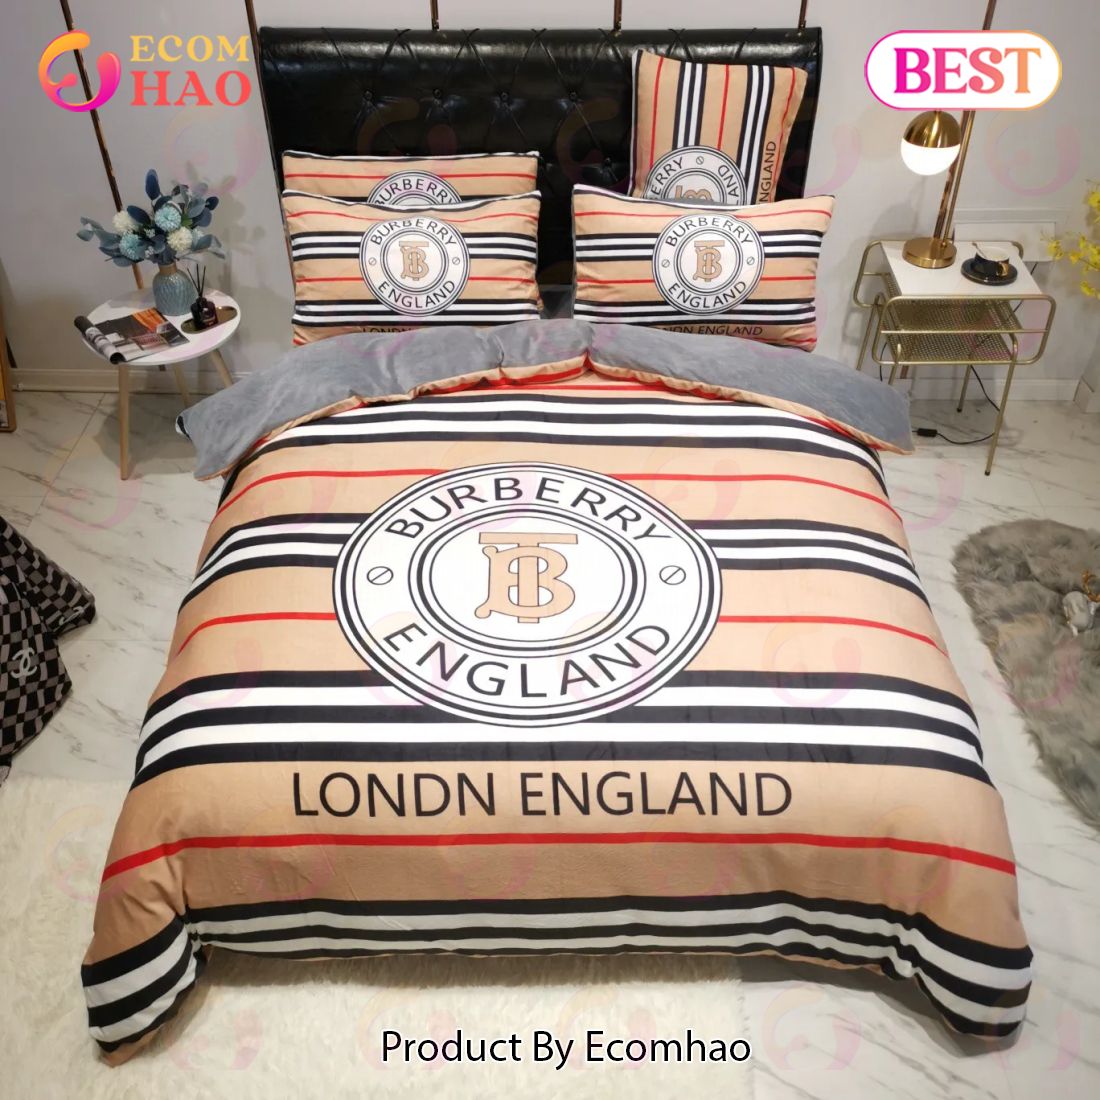 Burberry Bedding 3D Printed Bedding Sets Quilt Sets Duvet Cover Luxury Brand Bedding Decor Bedroom Sets Best Luxury Bed Sets Gift Thankgivings And Christmas